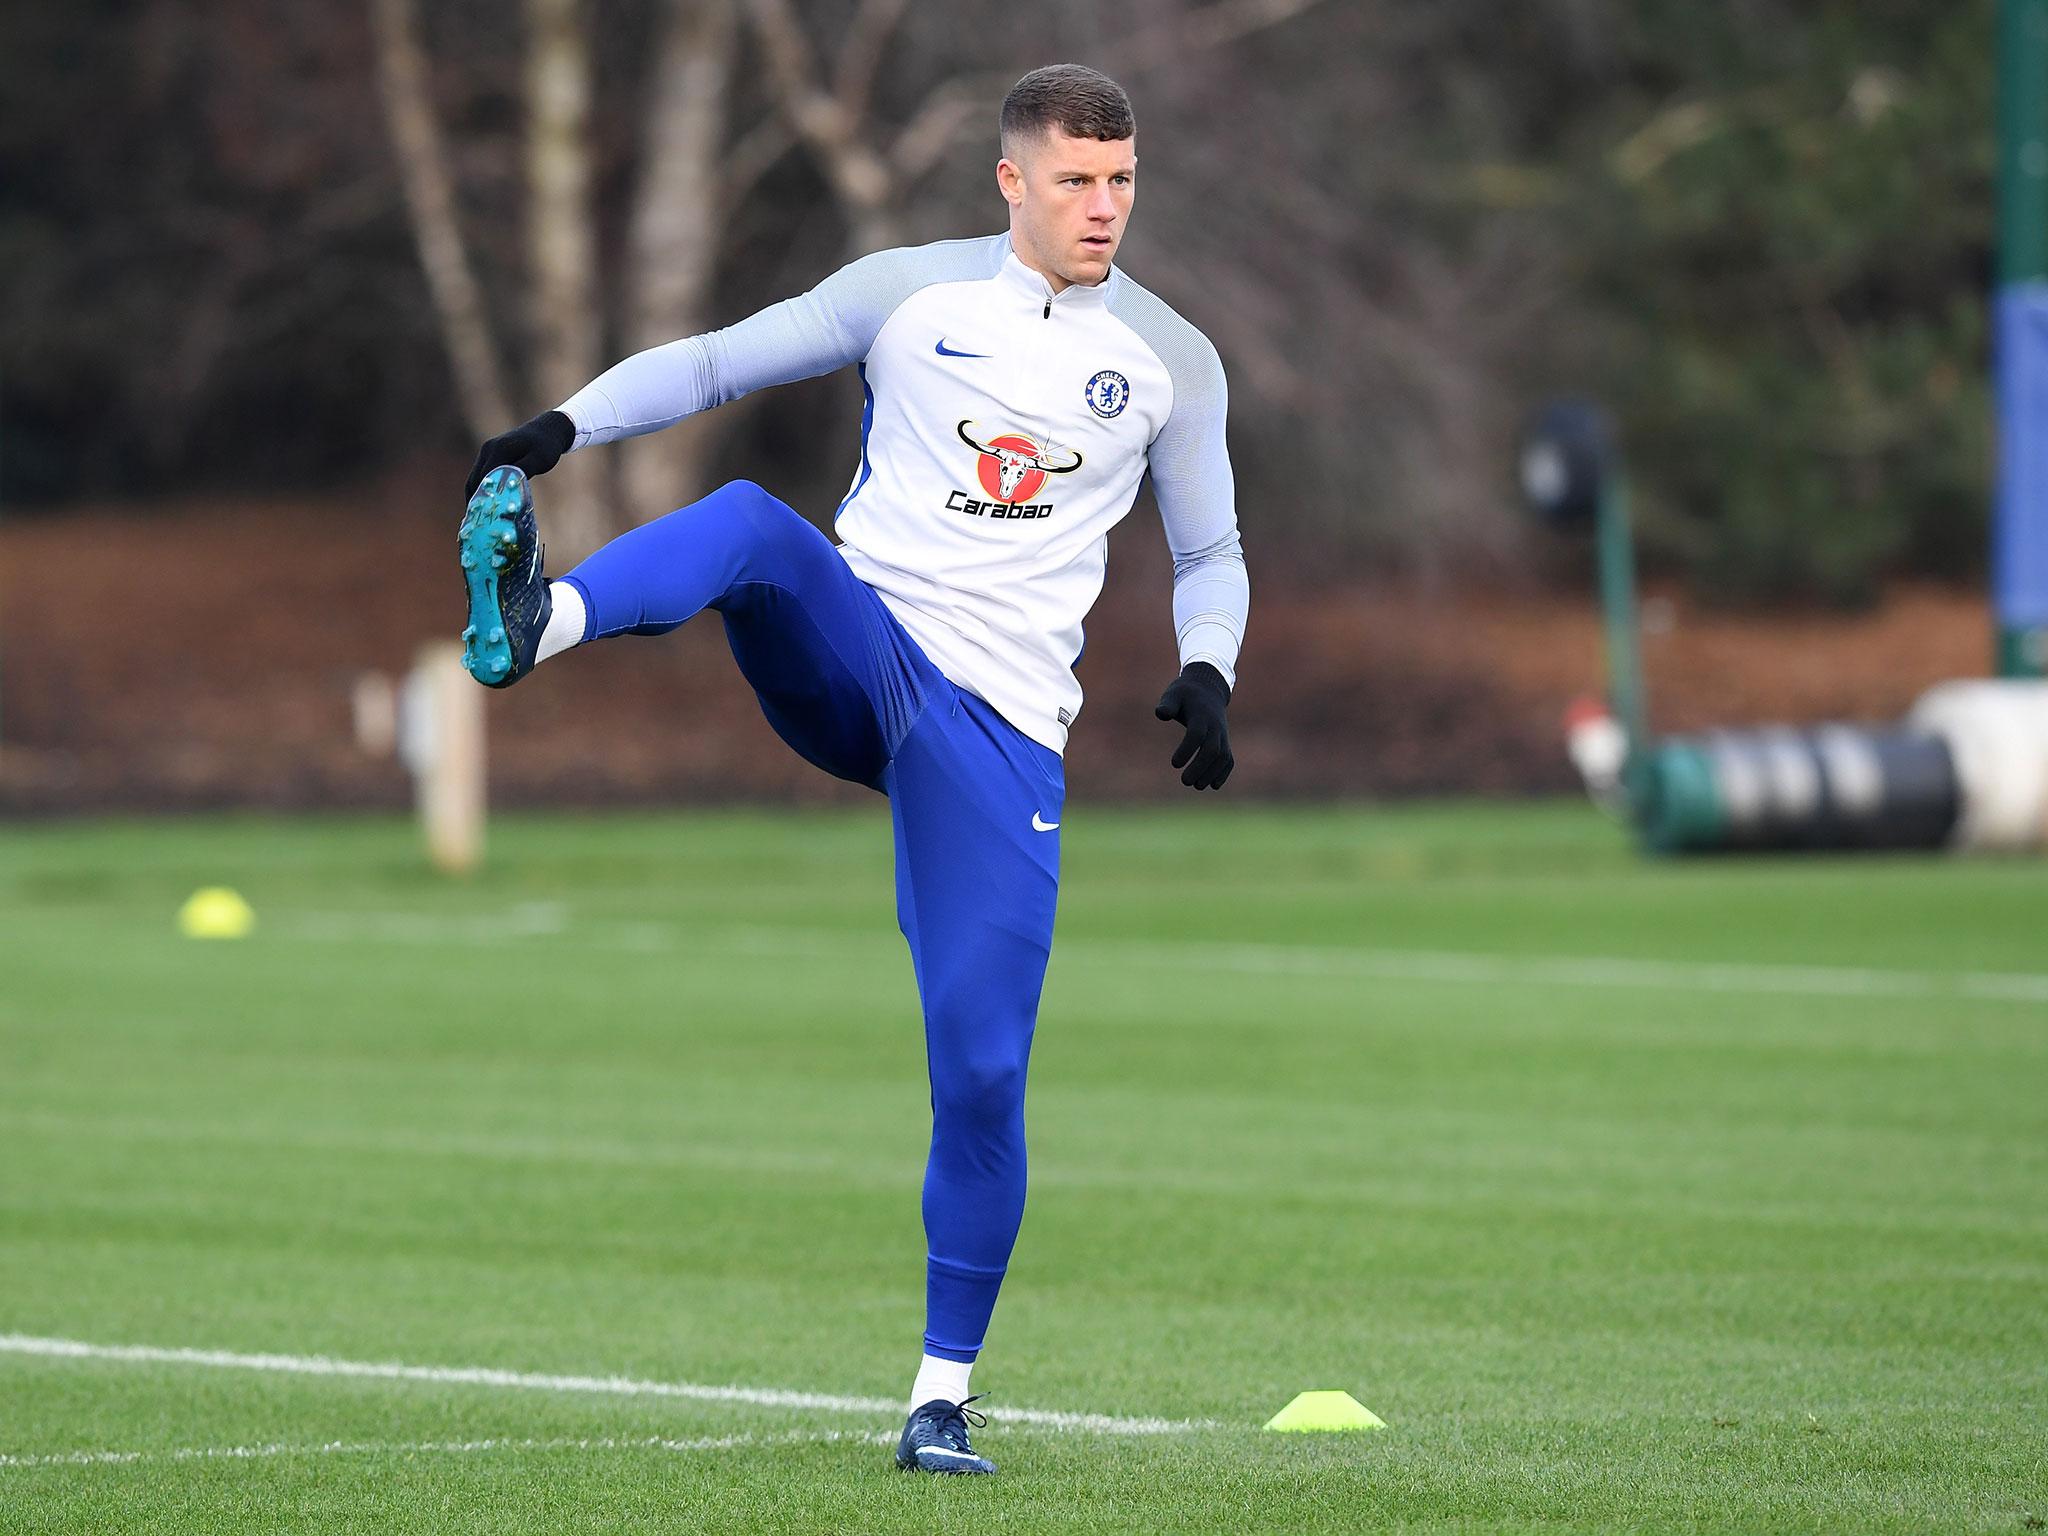 Barkley arrived at the club short on fitness after a hamstring injury